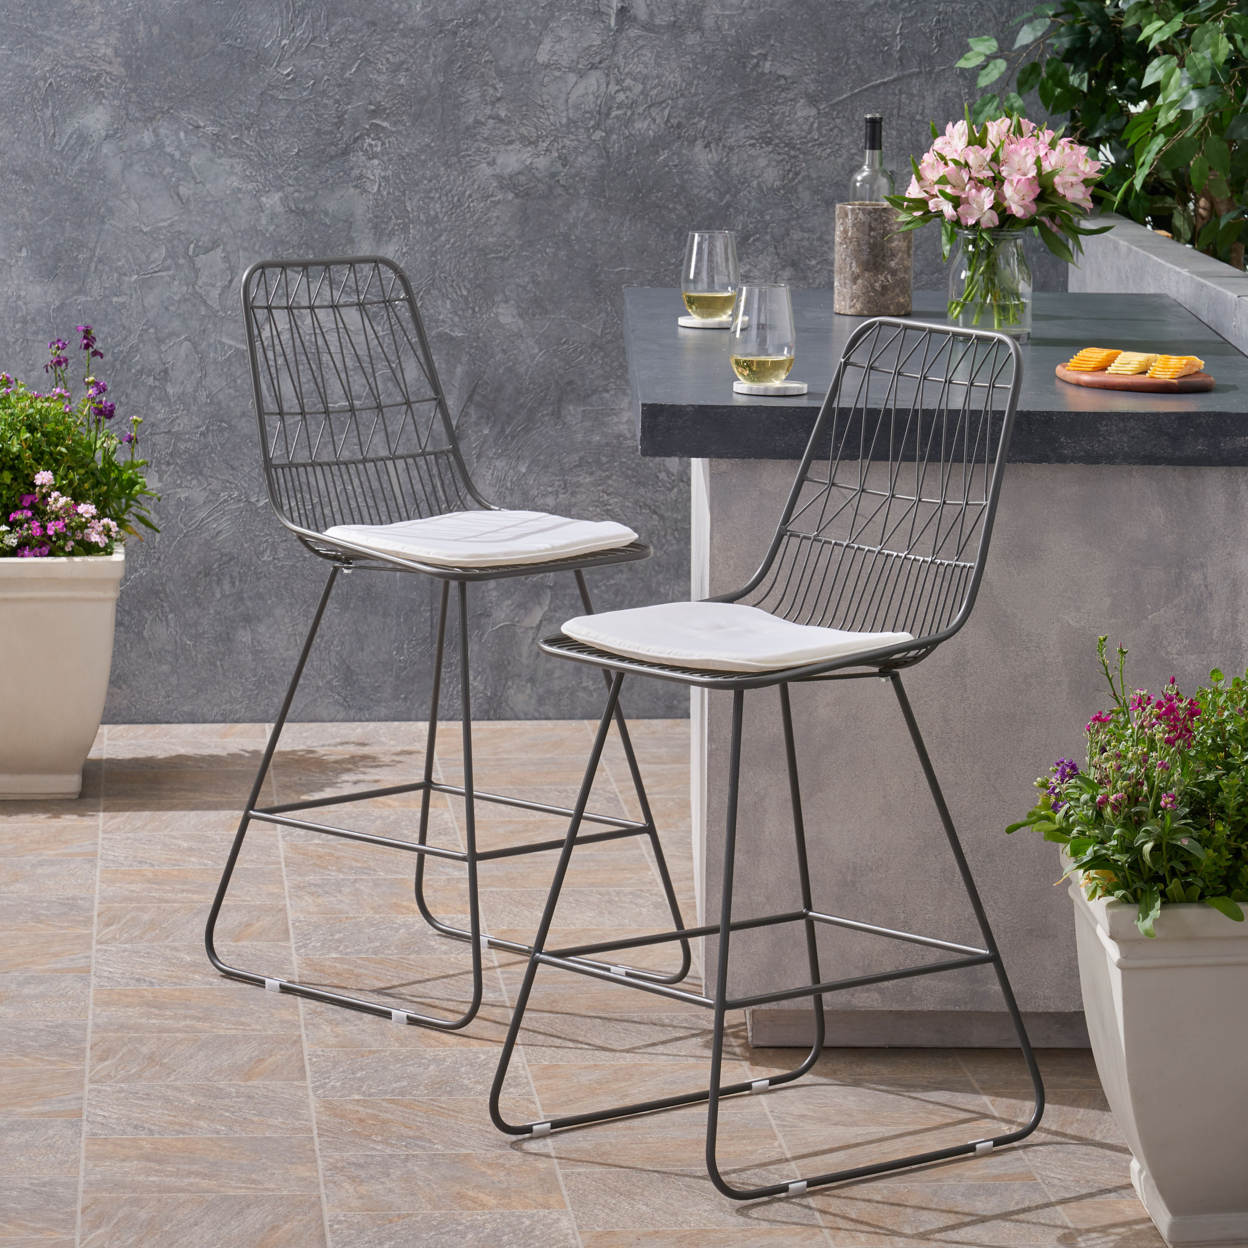 Hedy Outdoor 26 Seats Iron Counter Stools With Cushions (Set Of 2) - Gray